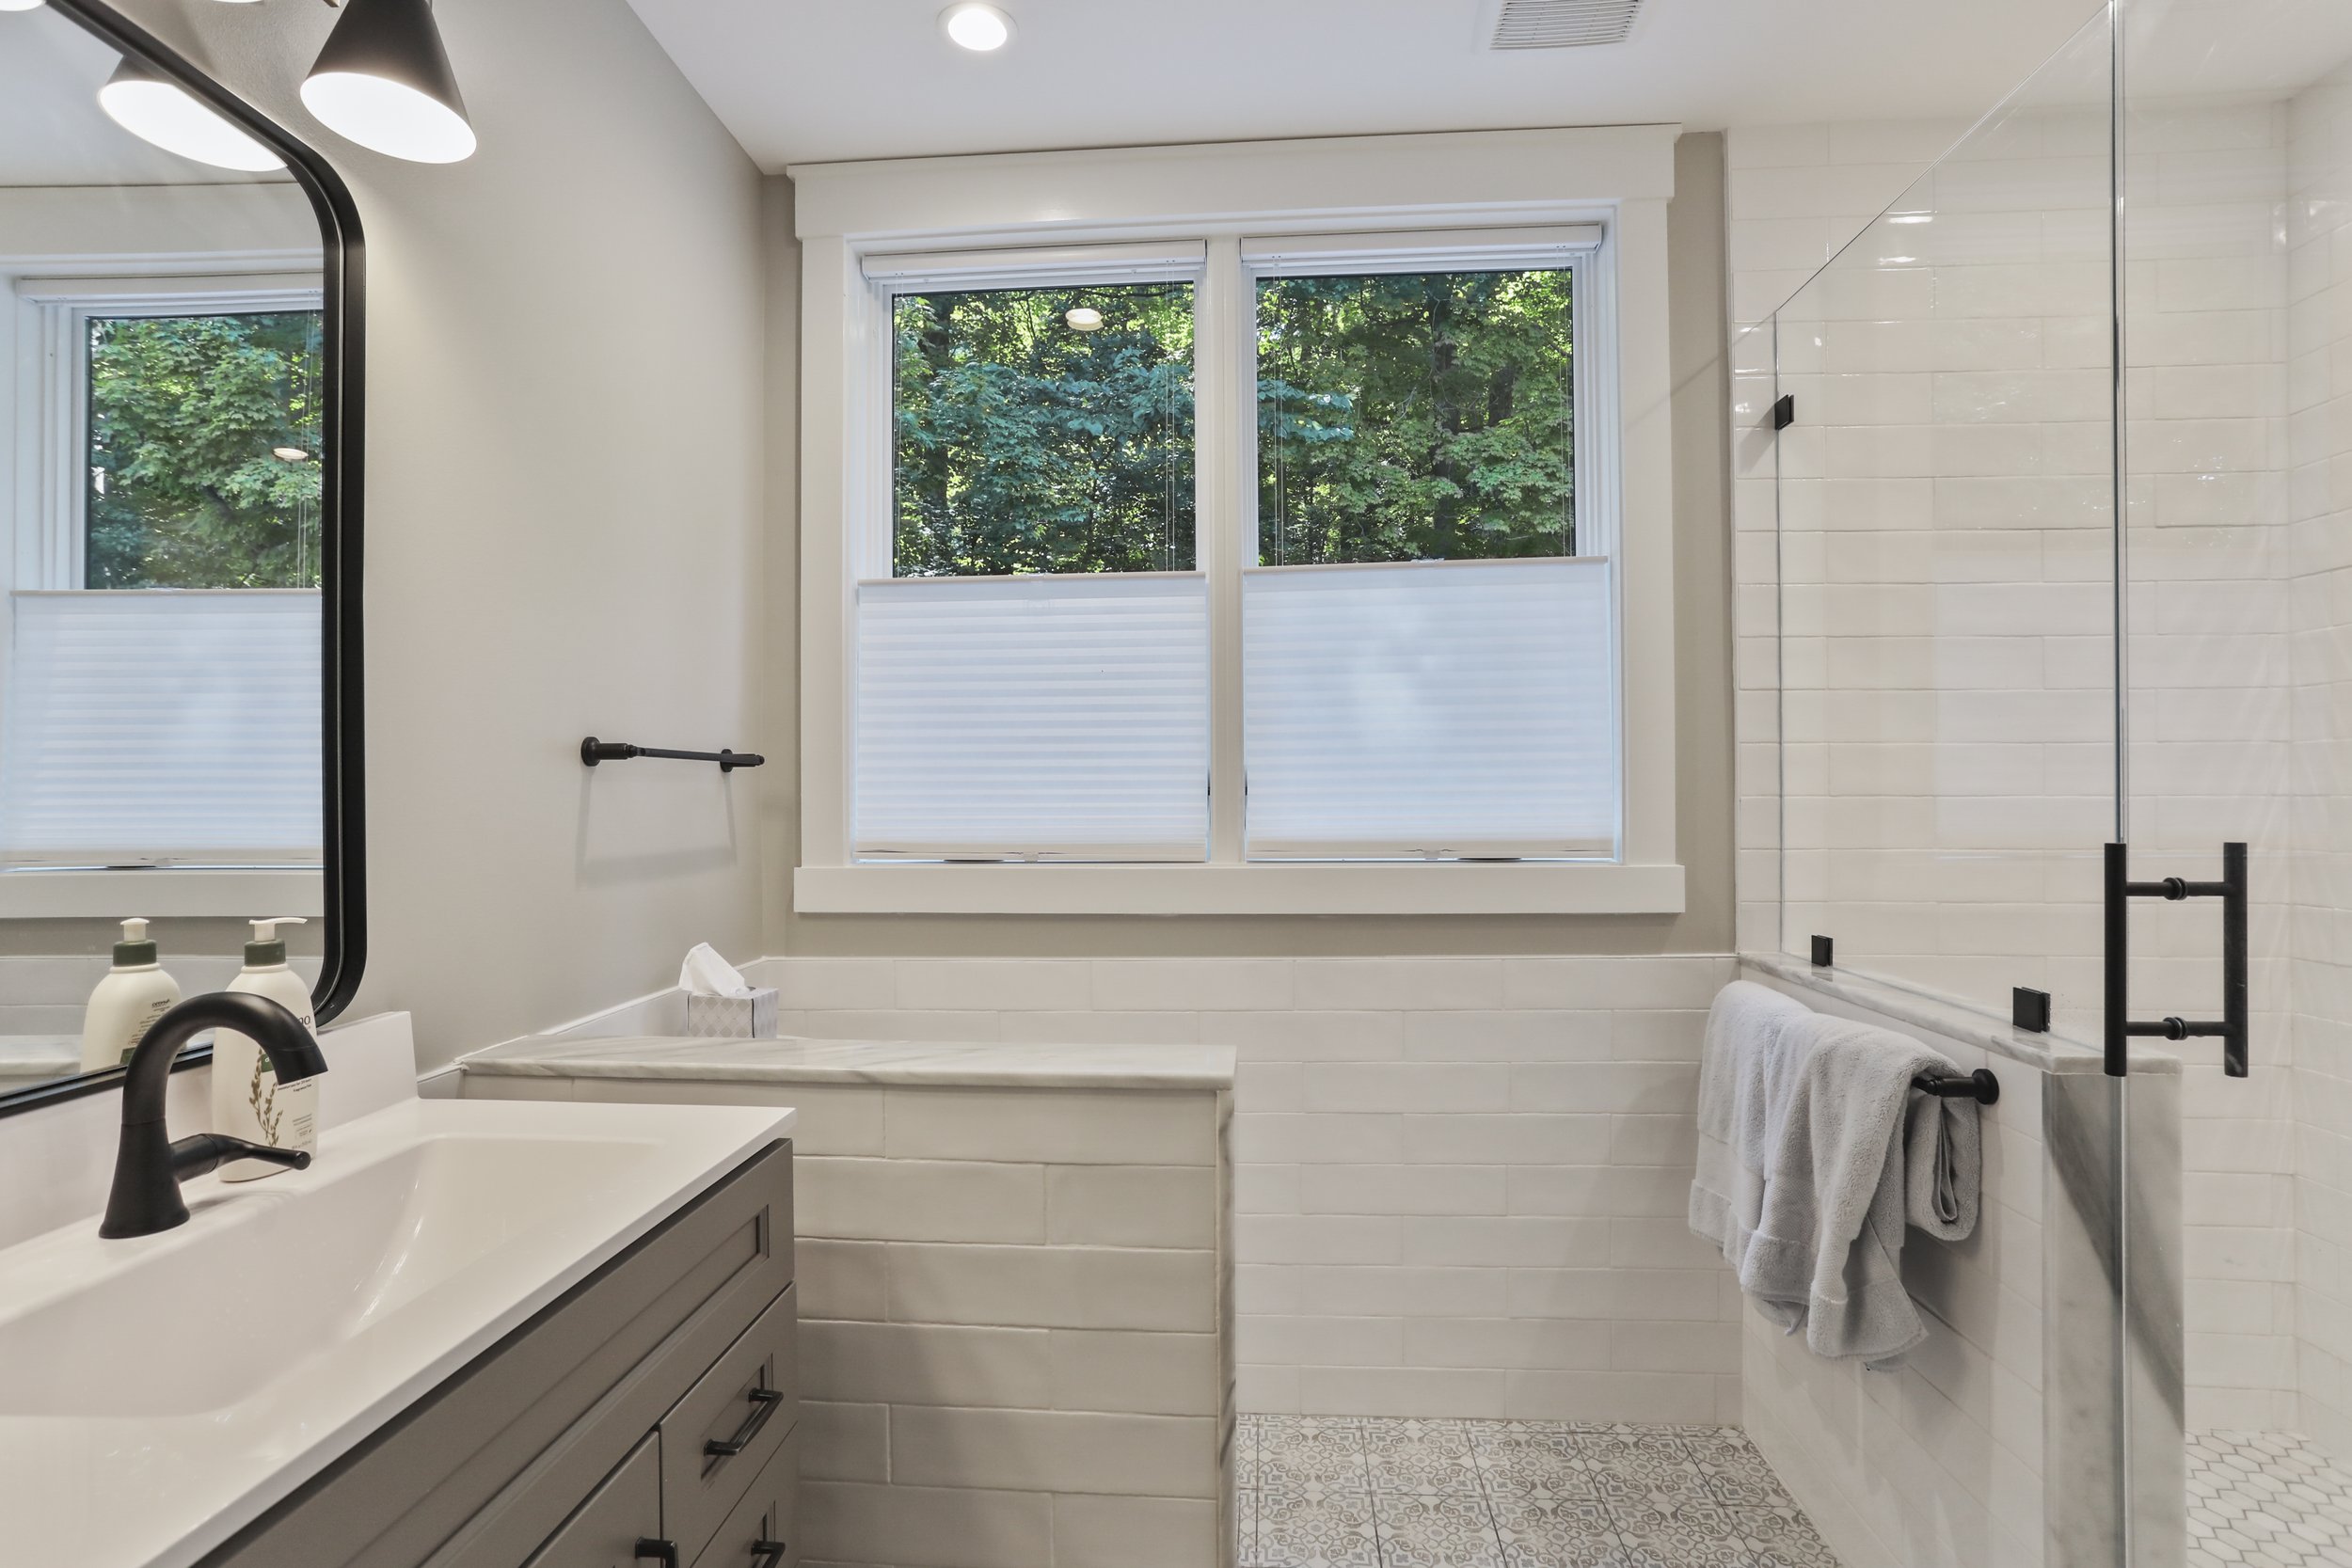  AFTER:  The new master bath is in the original kitchen’s location.  Triangle windows were removed, and new casement windows are centered on the gable.  Above the flat ceiling is a ledge so that the high transom window is visible from the bedroom sid